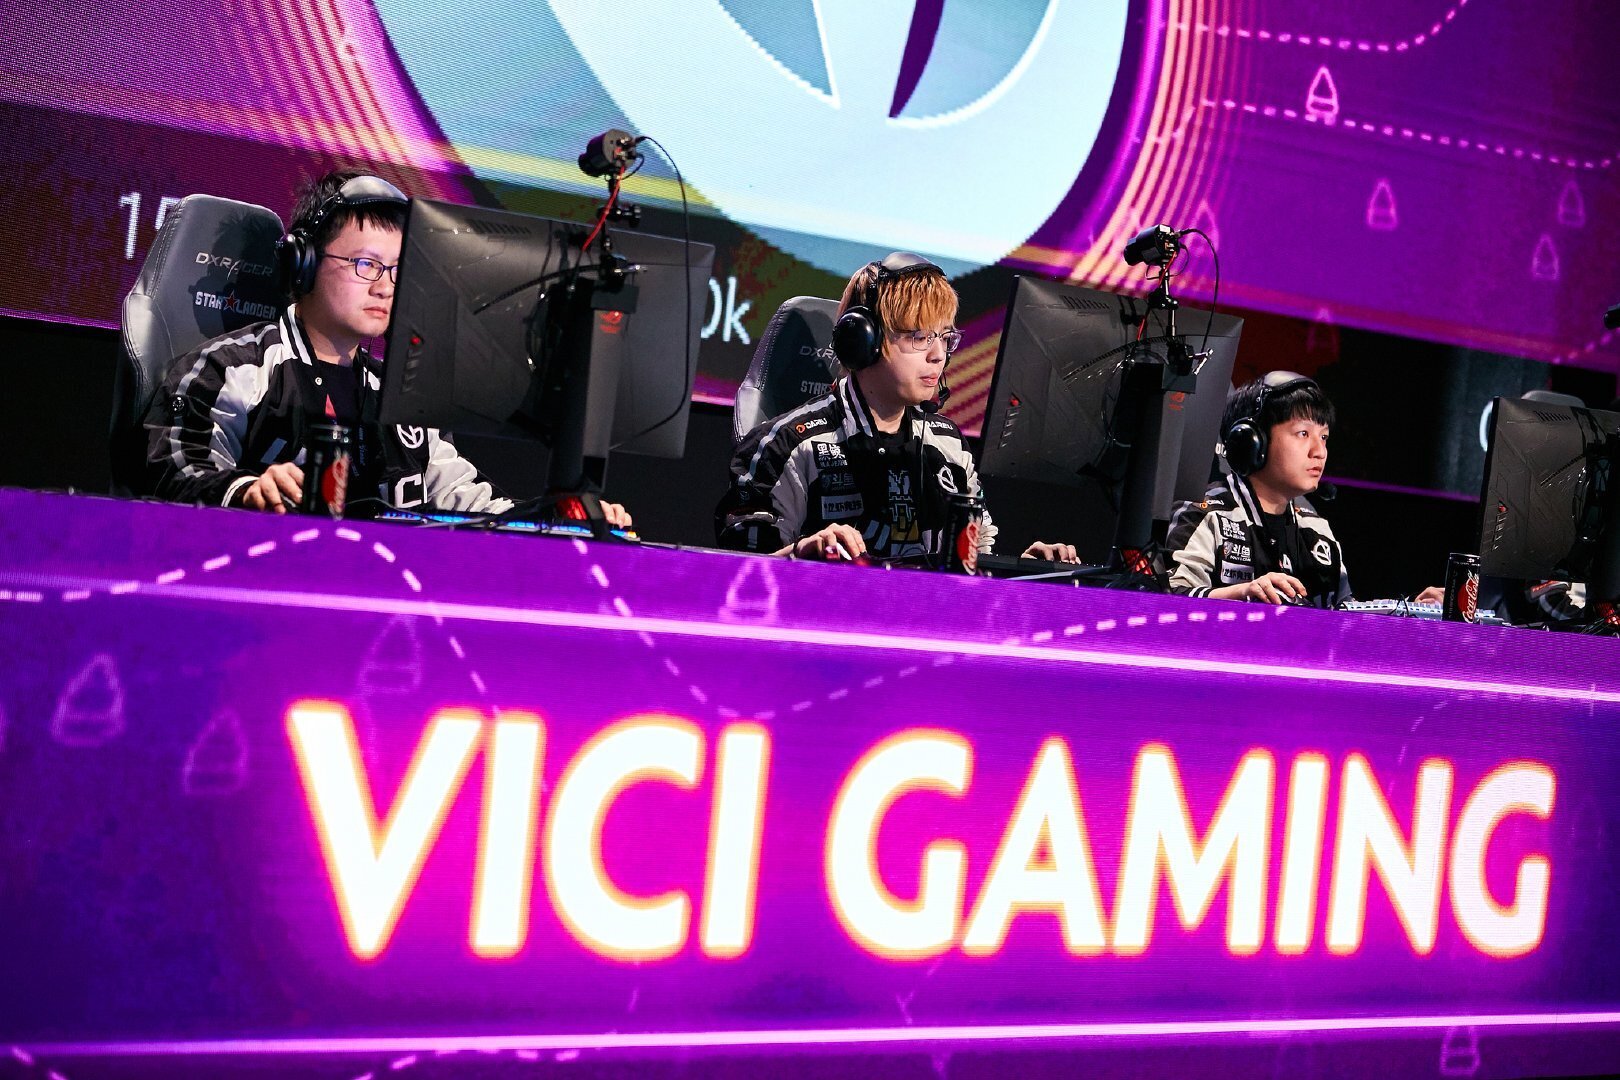 Vici Gaming took home top honors at the StarLadder ImbaTV Dota 2 Minor, advancing to the DreamLeague Season 11 in Stockholm, Sweden.